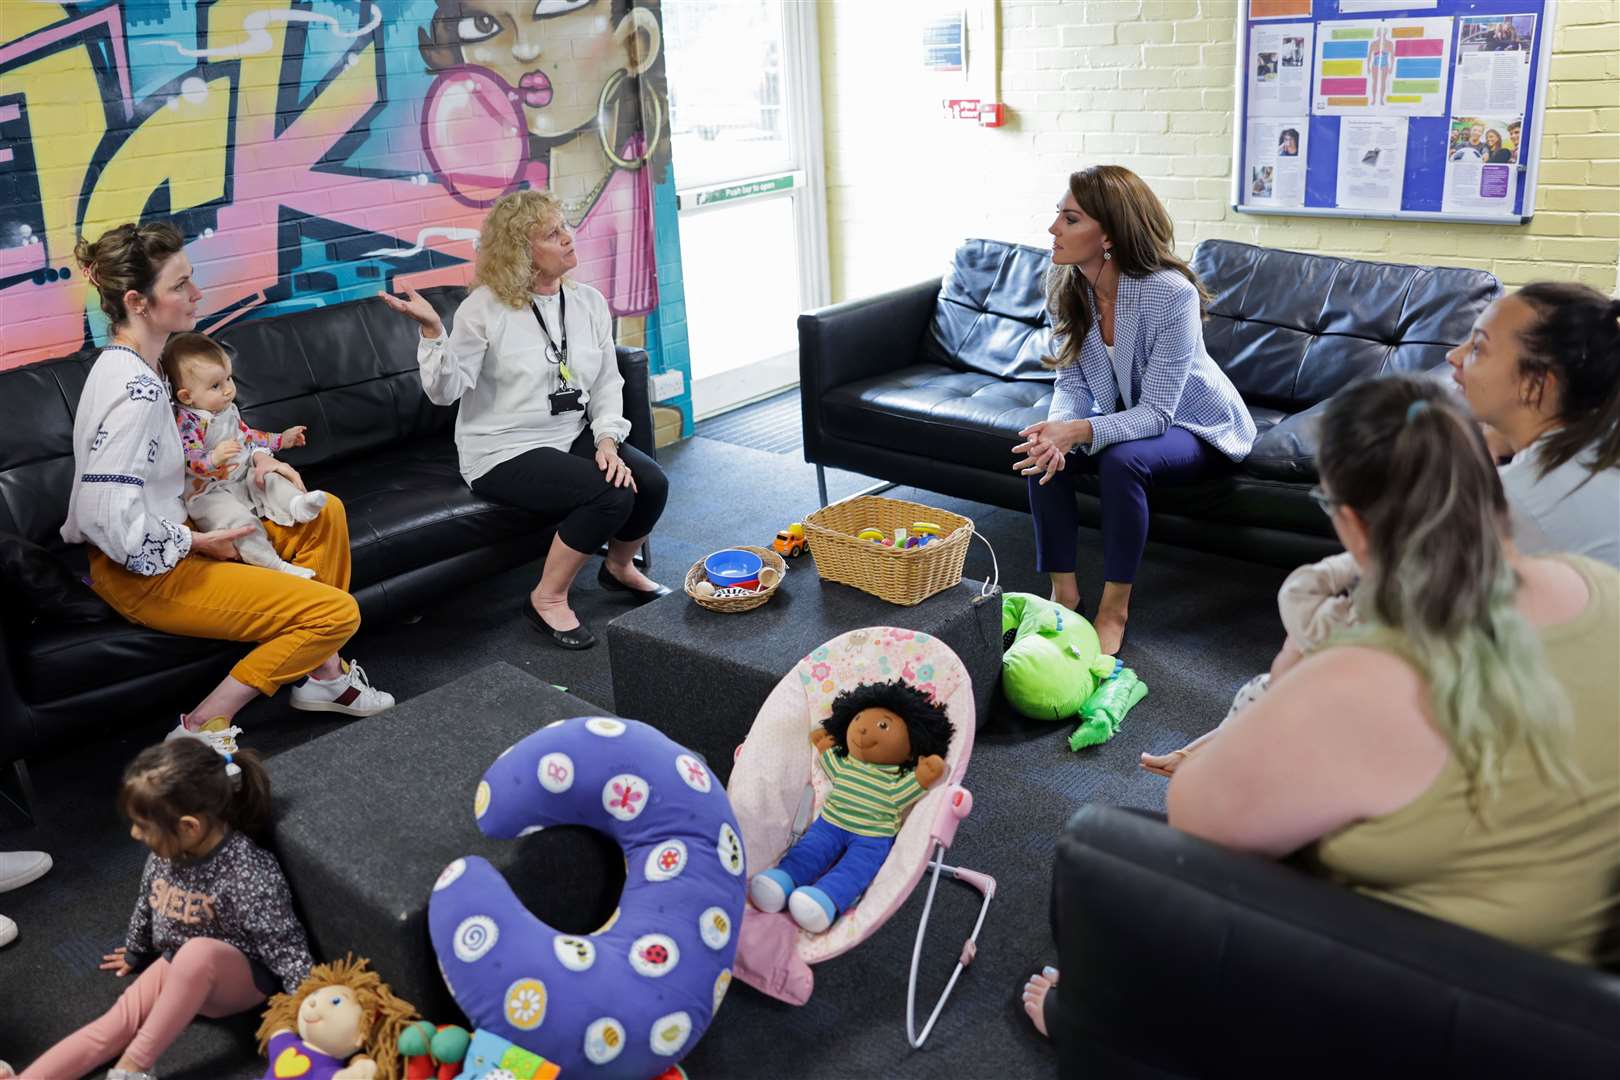 The Princess of Wales during a visit to the Windsor Family Hub in Berkshire (Chris Jackson/PA).